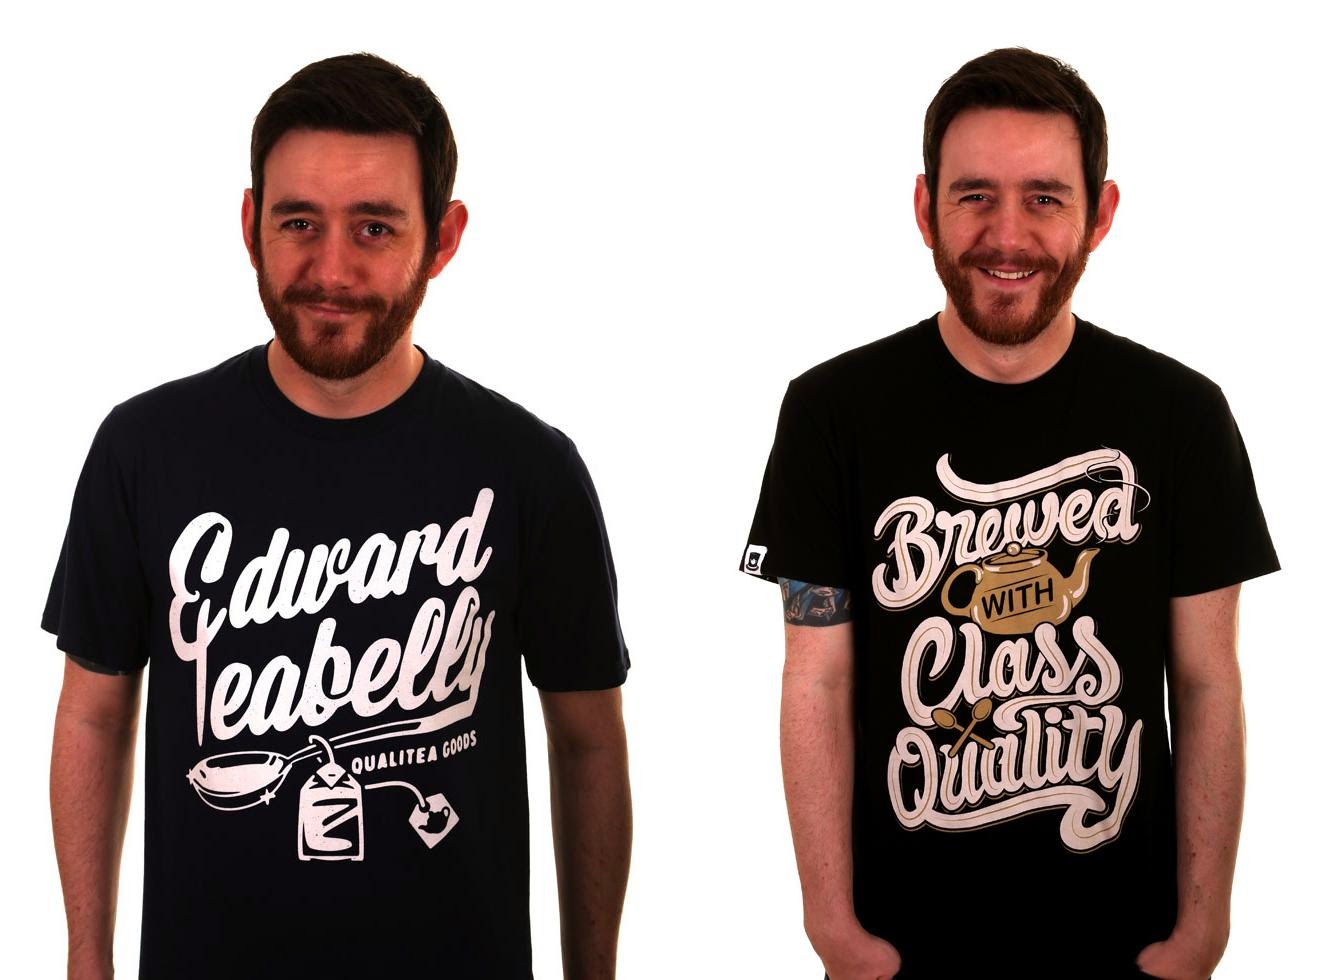 Edward Teabelly Spring 2014 T-Shirt Collection - “Qualitea Goods” & “Class and Quality” T-Shirts